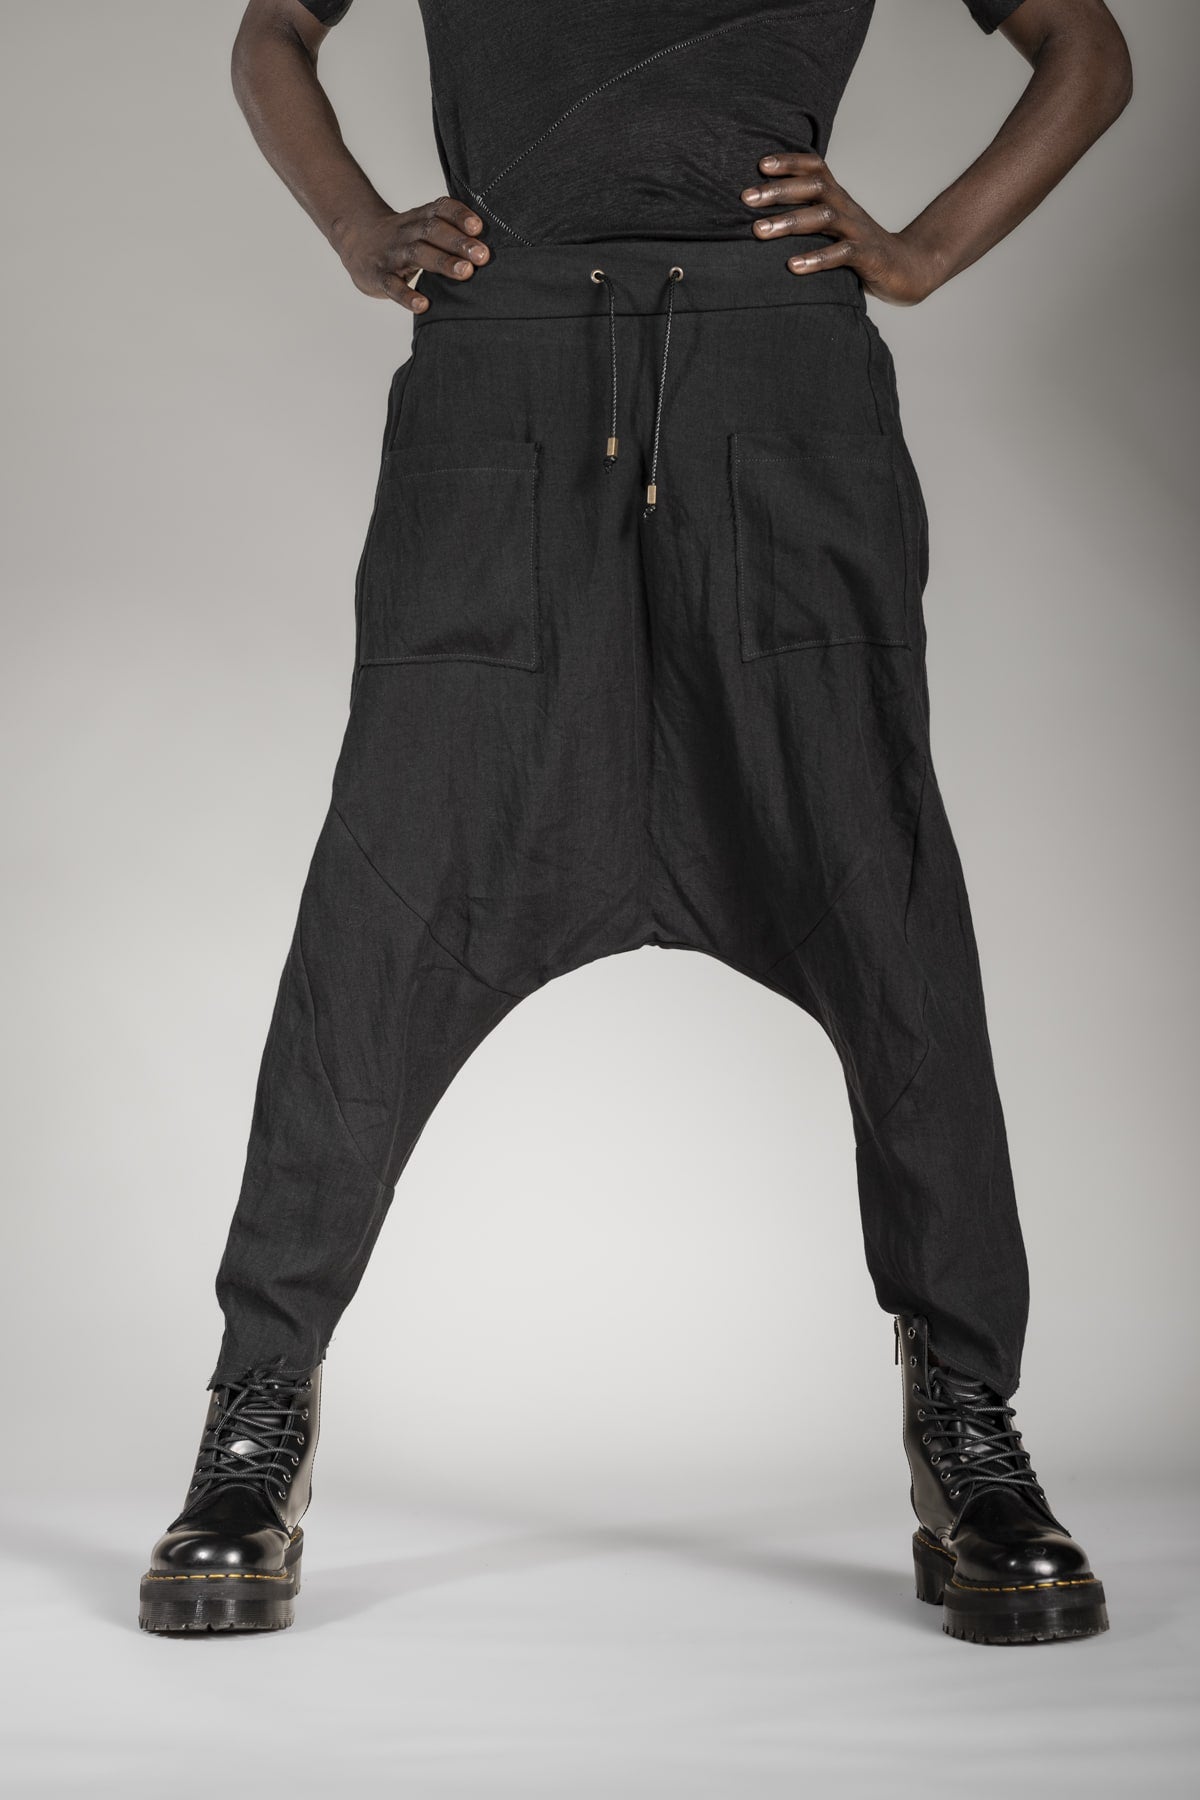 Autumn Winter Men Harem Indian Pants Male Loose Traditional Wide